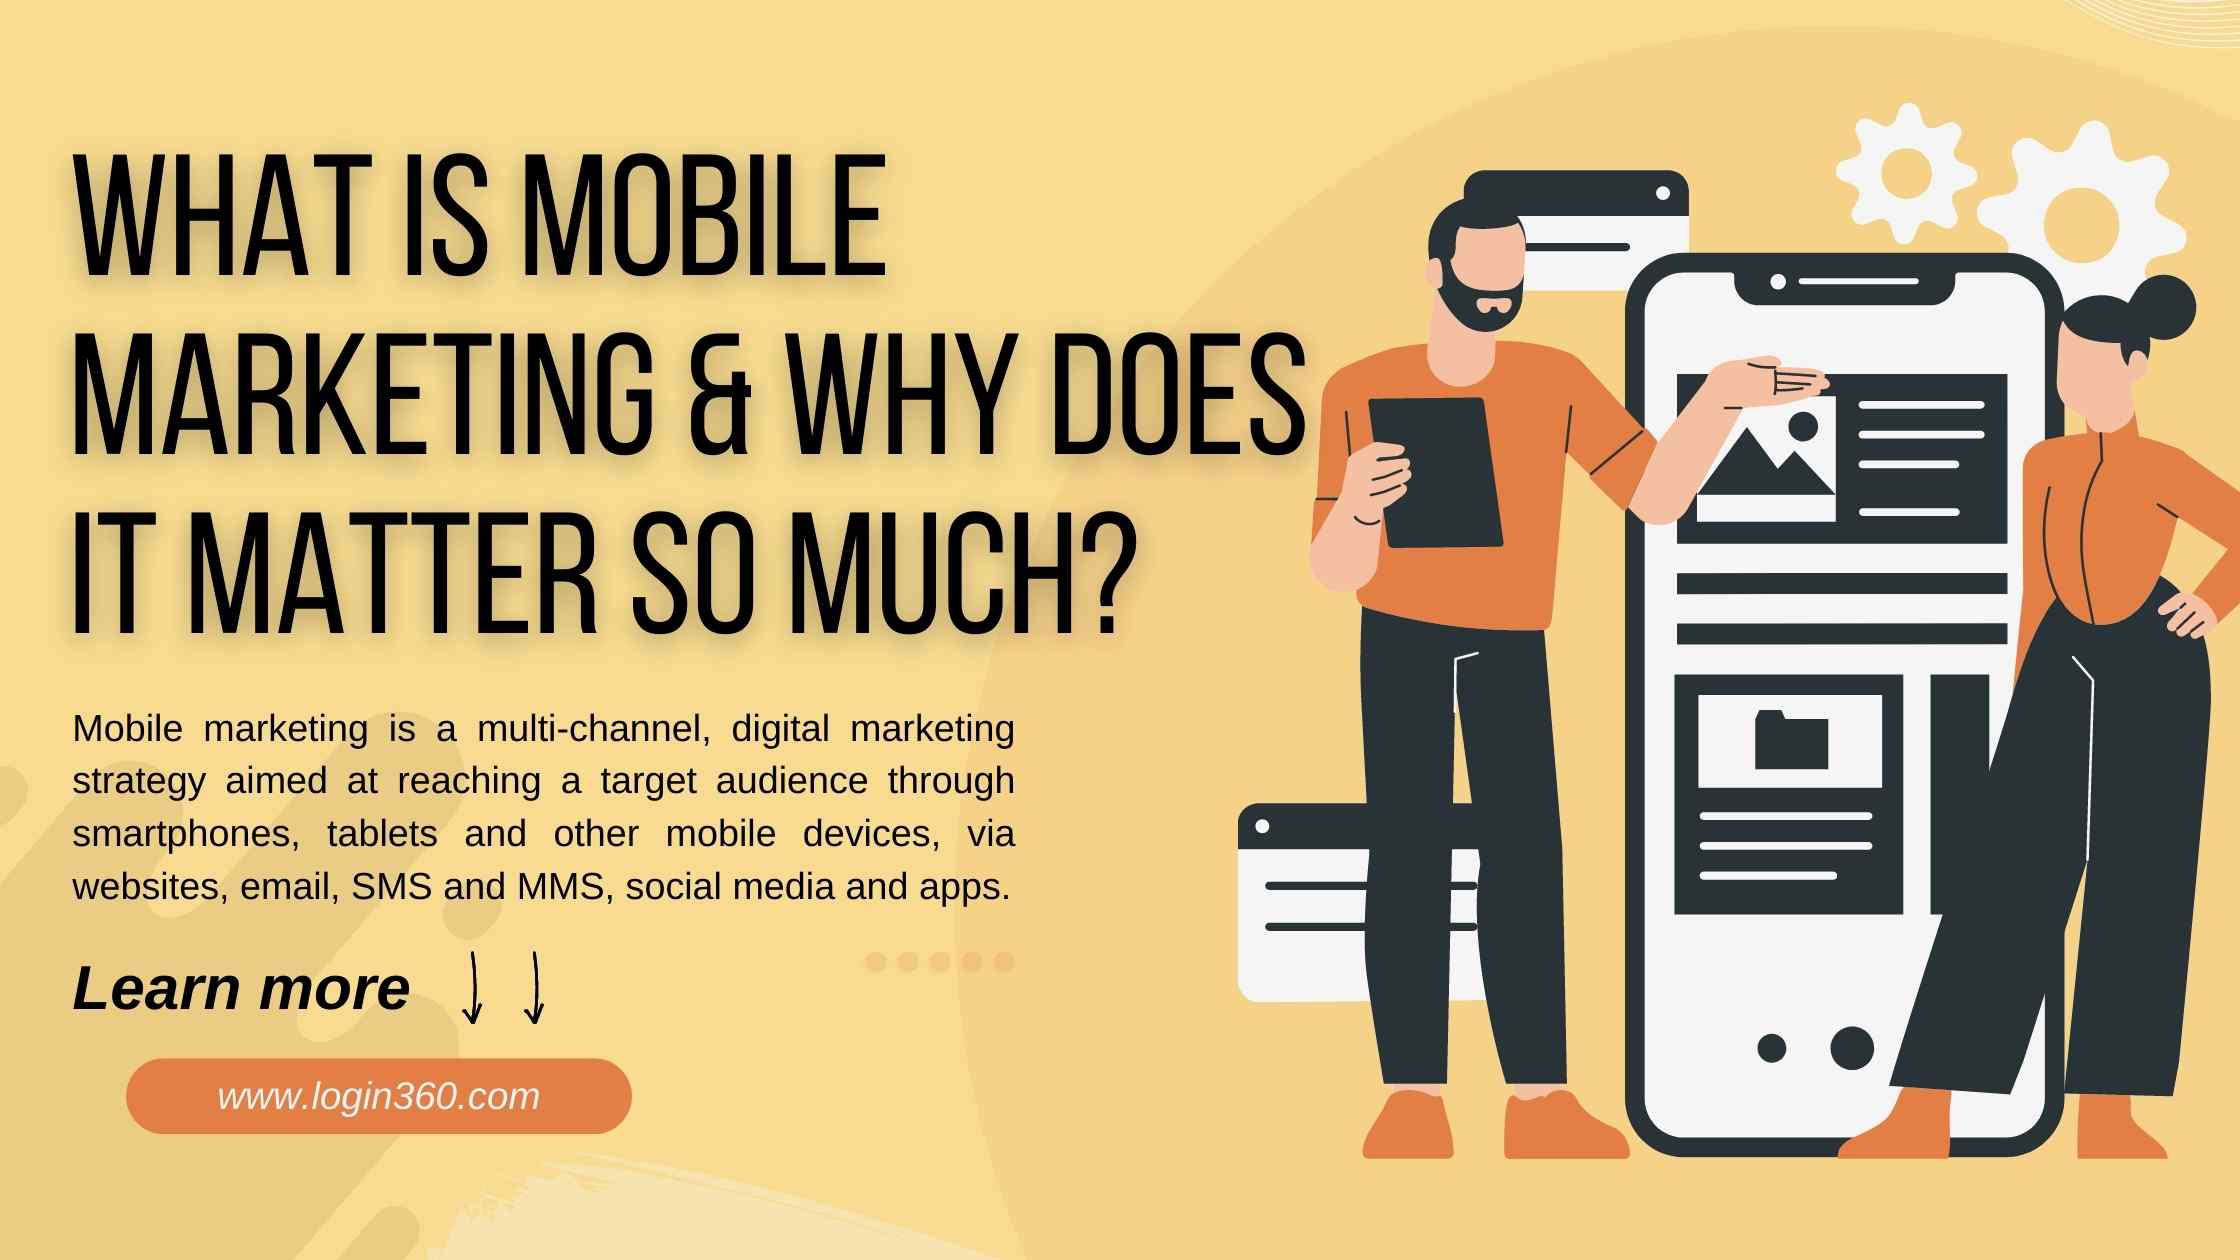 What Is Mobile Marketing & Why Does it Matter So Much?